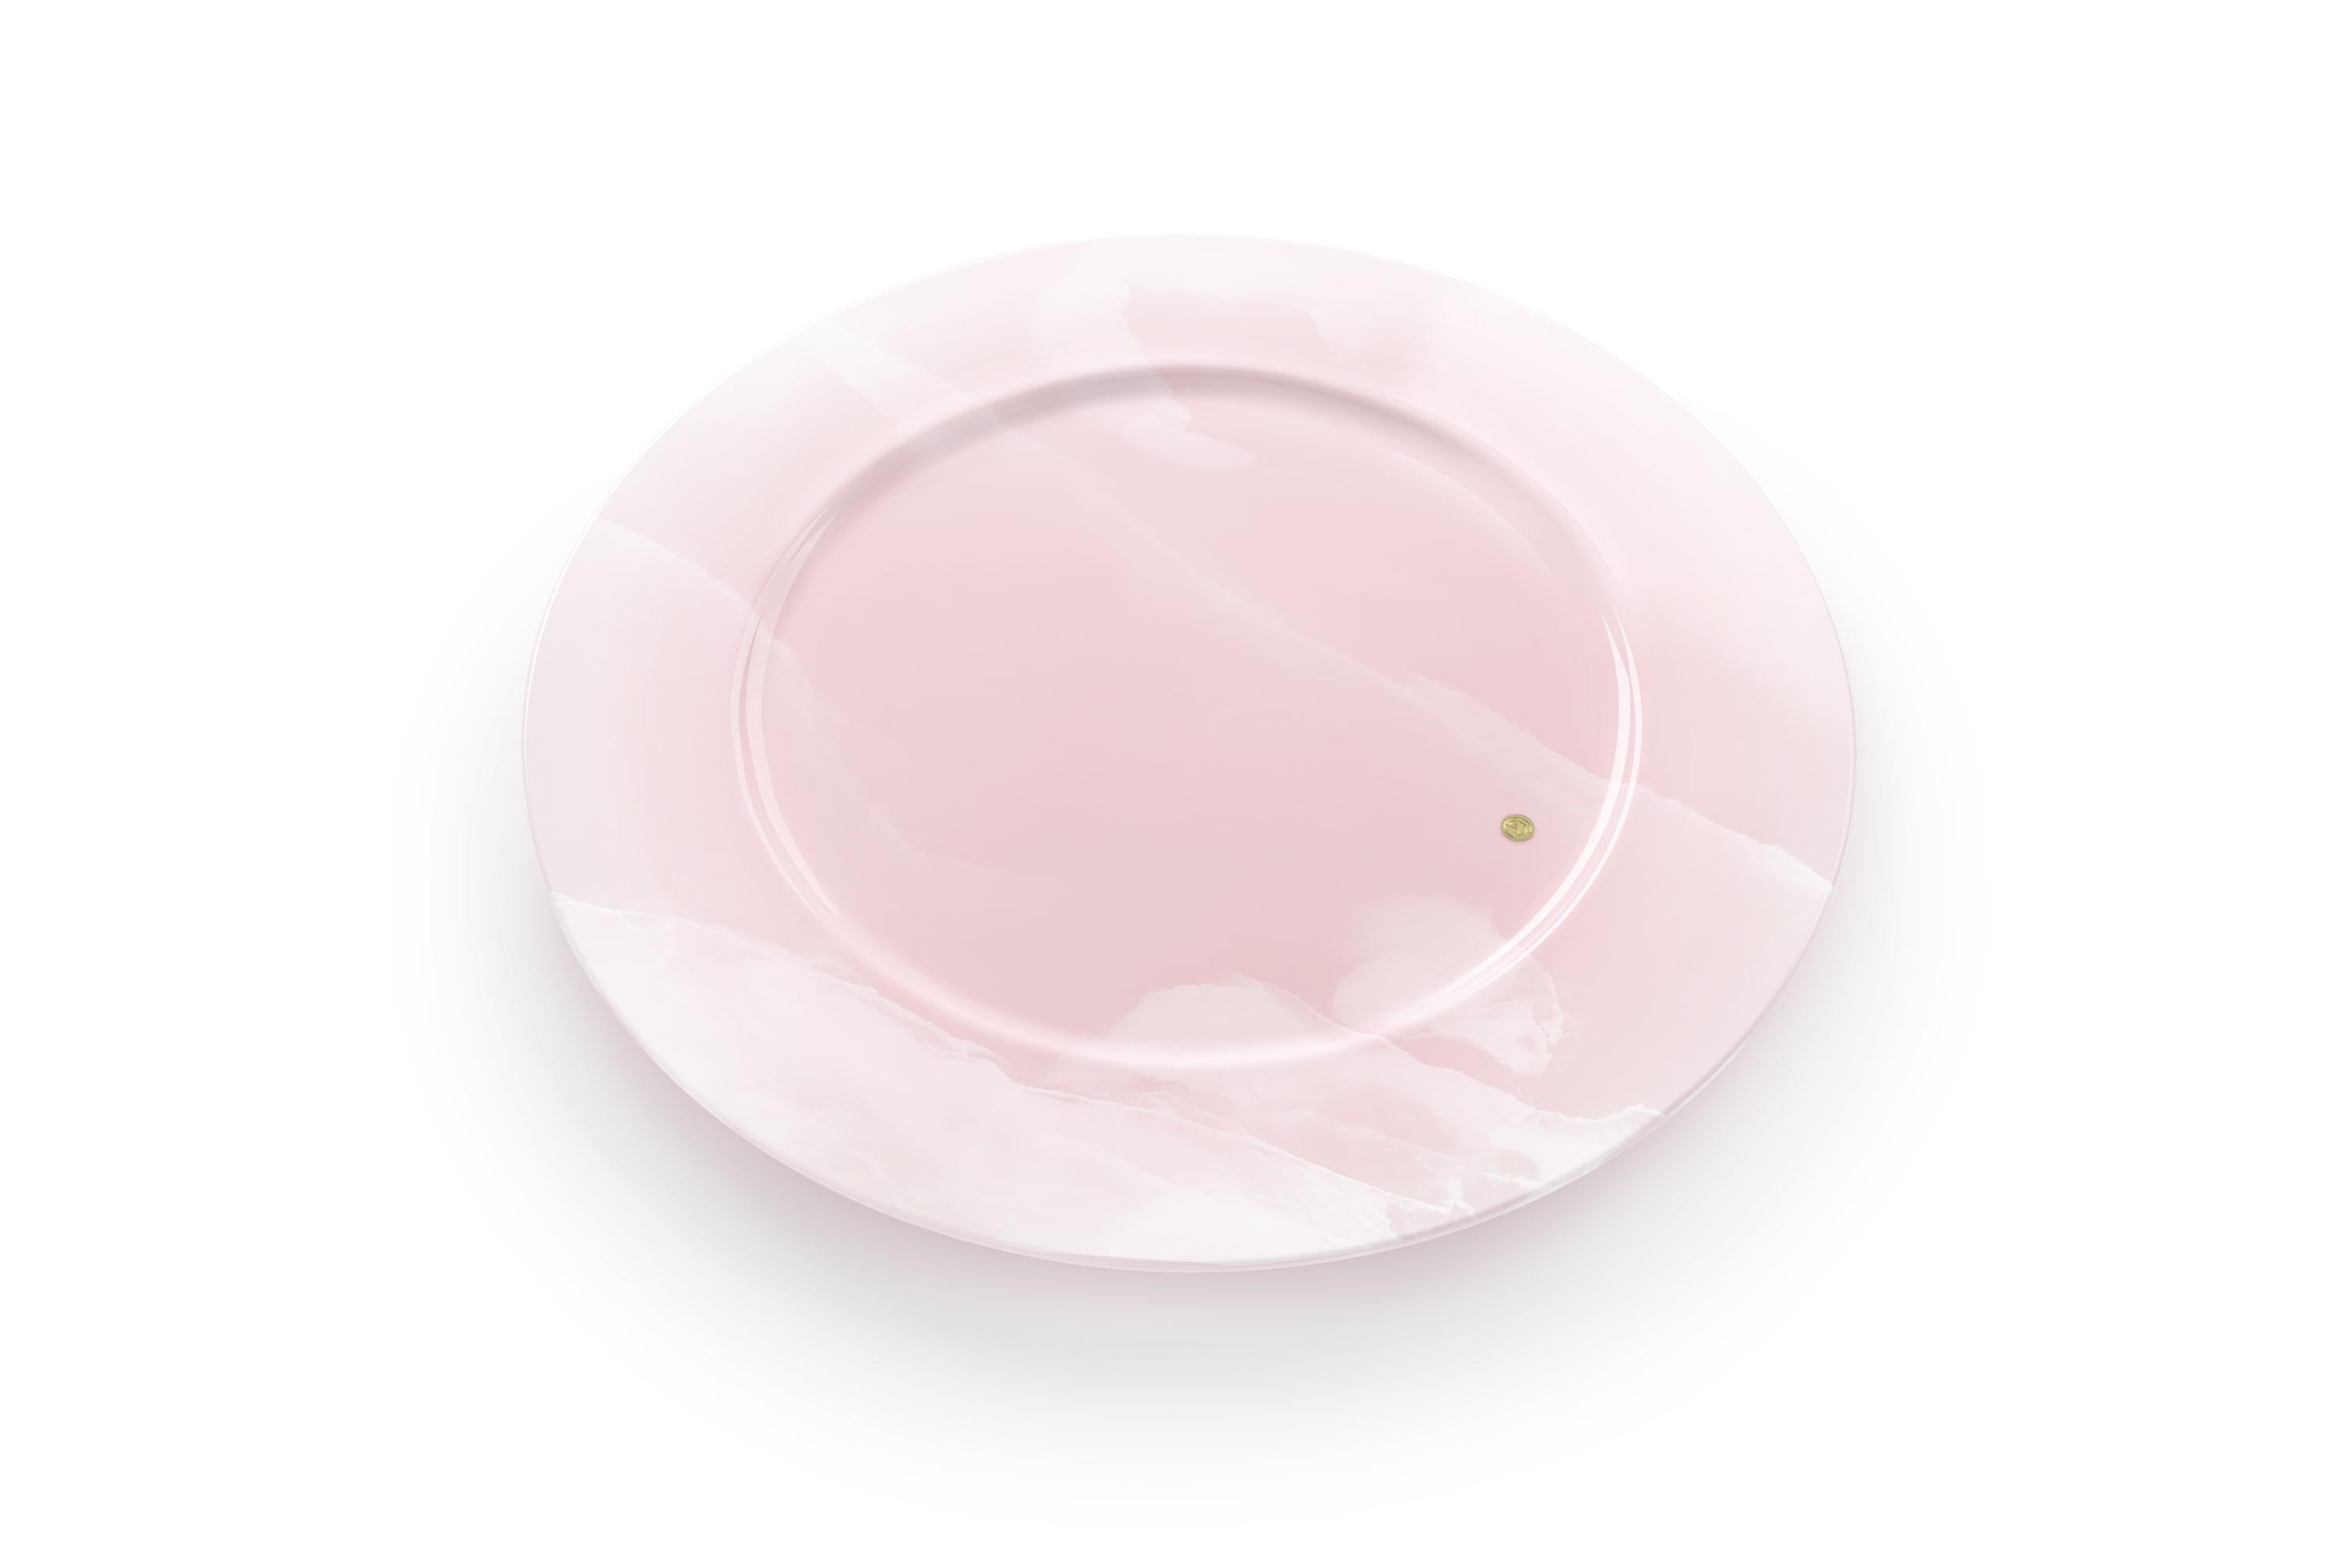 Set of 4 hand carved charger plate from pink onyx. Multiple use as charger plates, plates, platters and placers. The polished finishing underlines the transparency of the onyx making this a very precious object. 

Dimensions: D 33, H 1.9 cm.